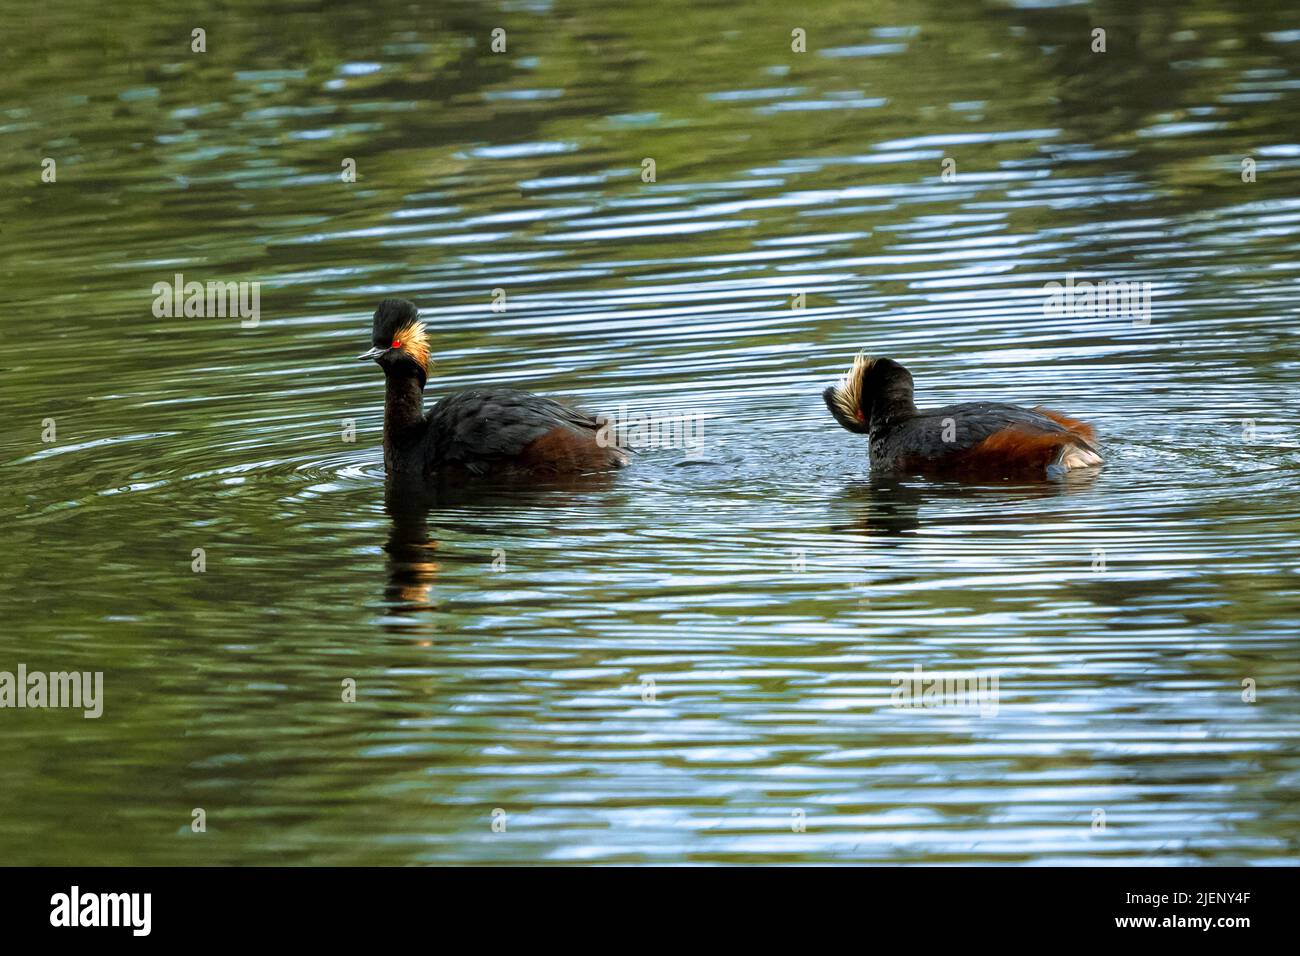 A pair of Eared Grebes (Podiceps nigricollis) swim by in a wetland lake, with one alert and the other one grooming. Stock Photo